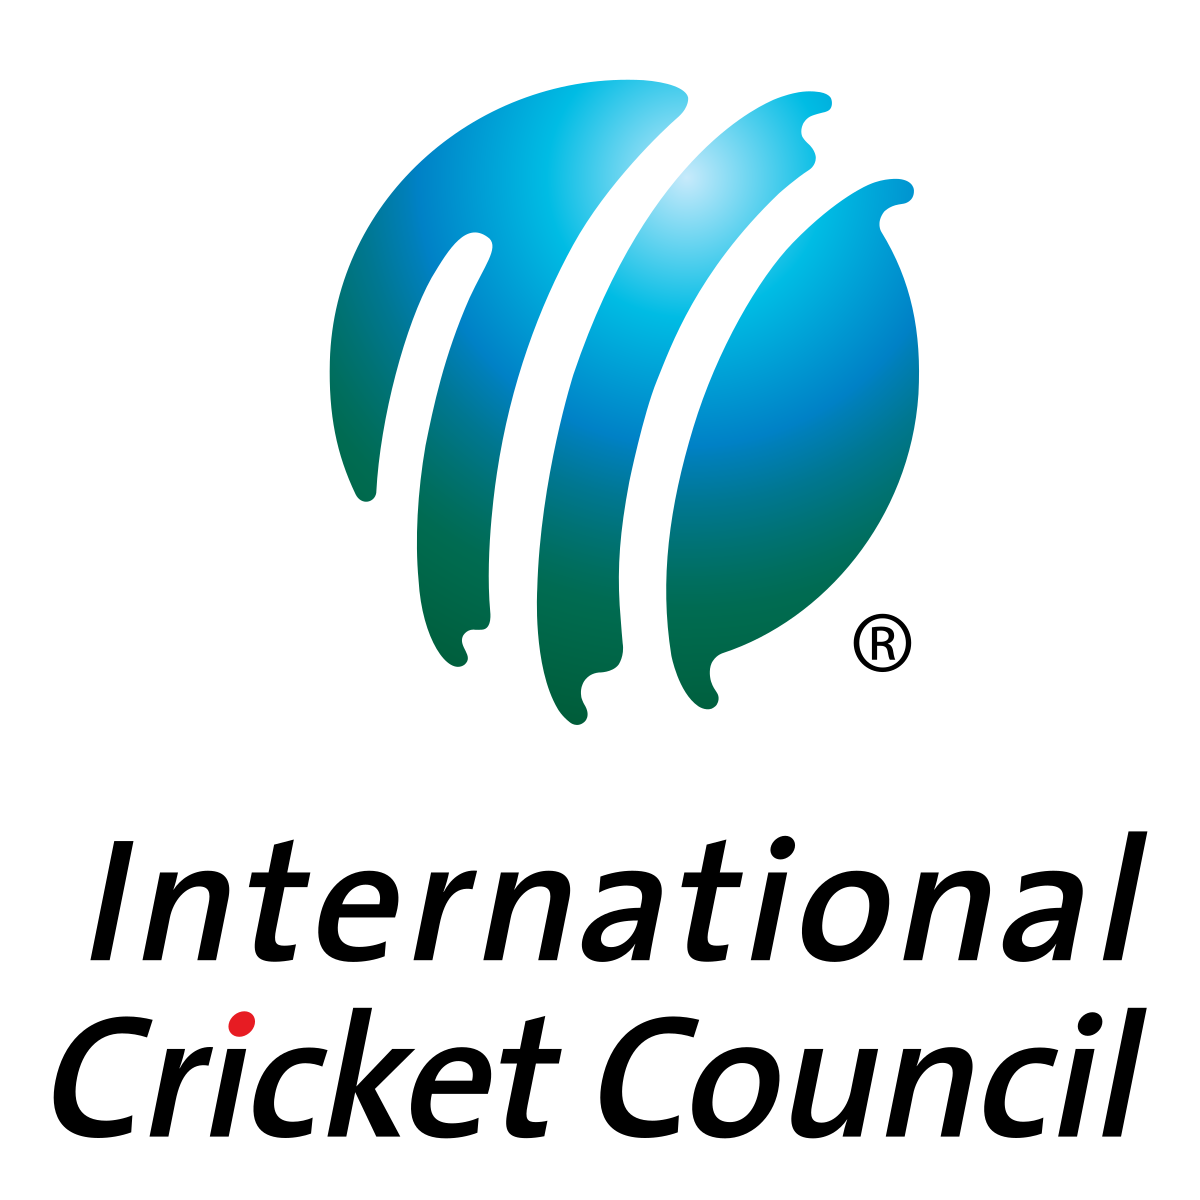 Greg Barclay gets second term as ICC chairman